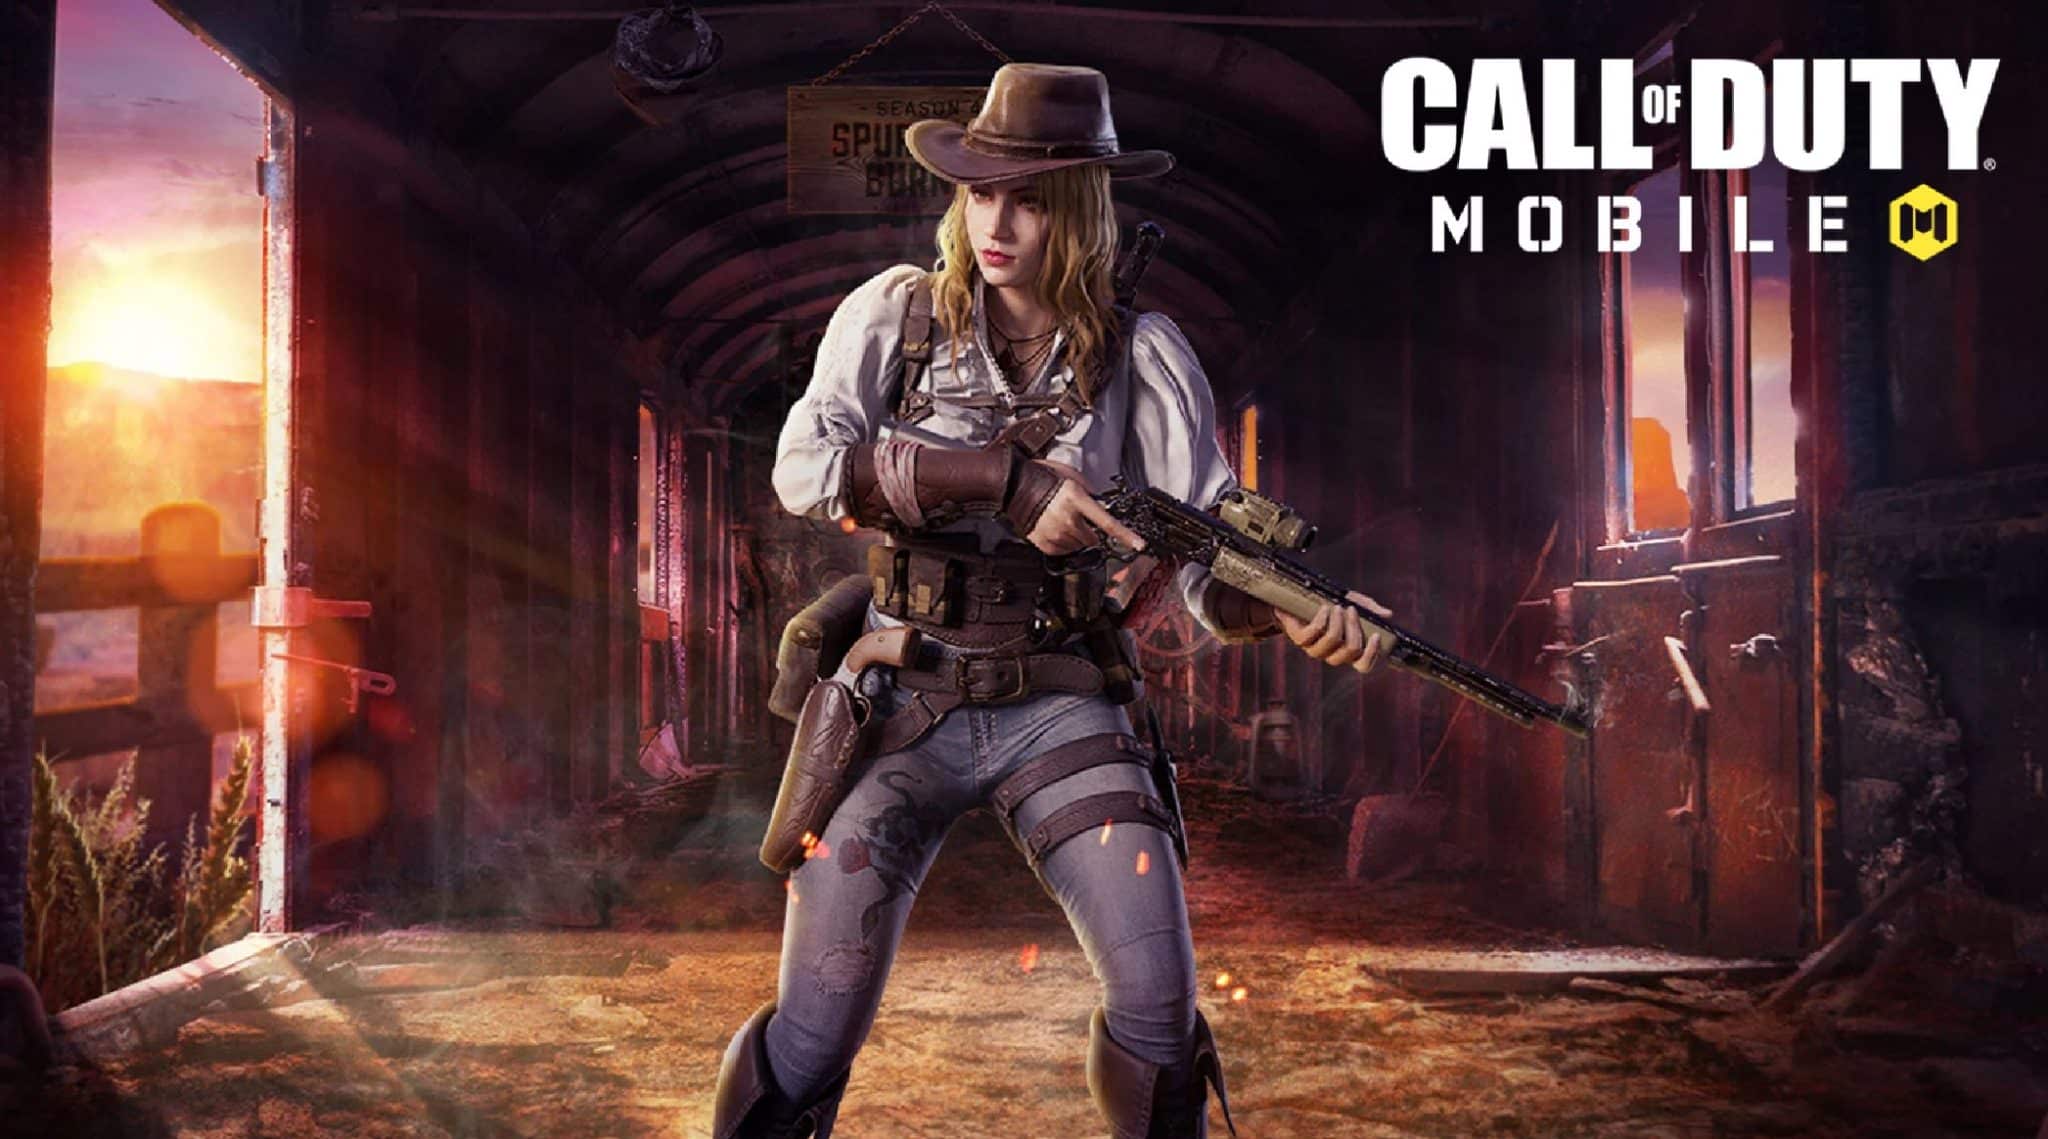 Confirmed: After COD Mobile We Have COD Warzone Mobile Coming